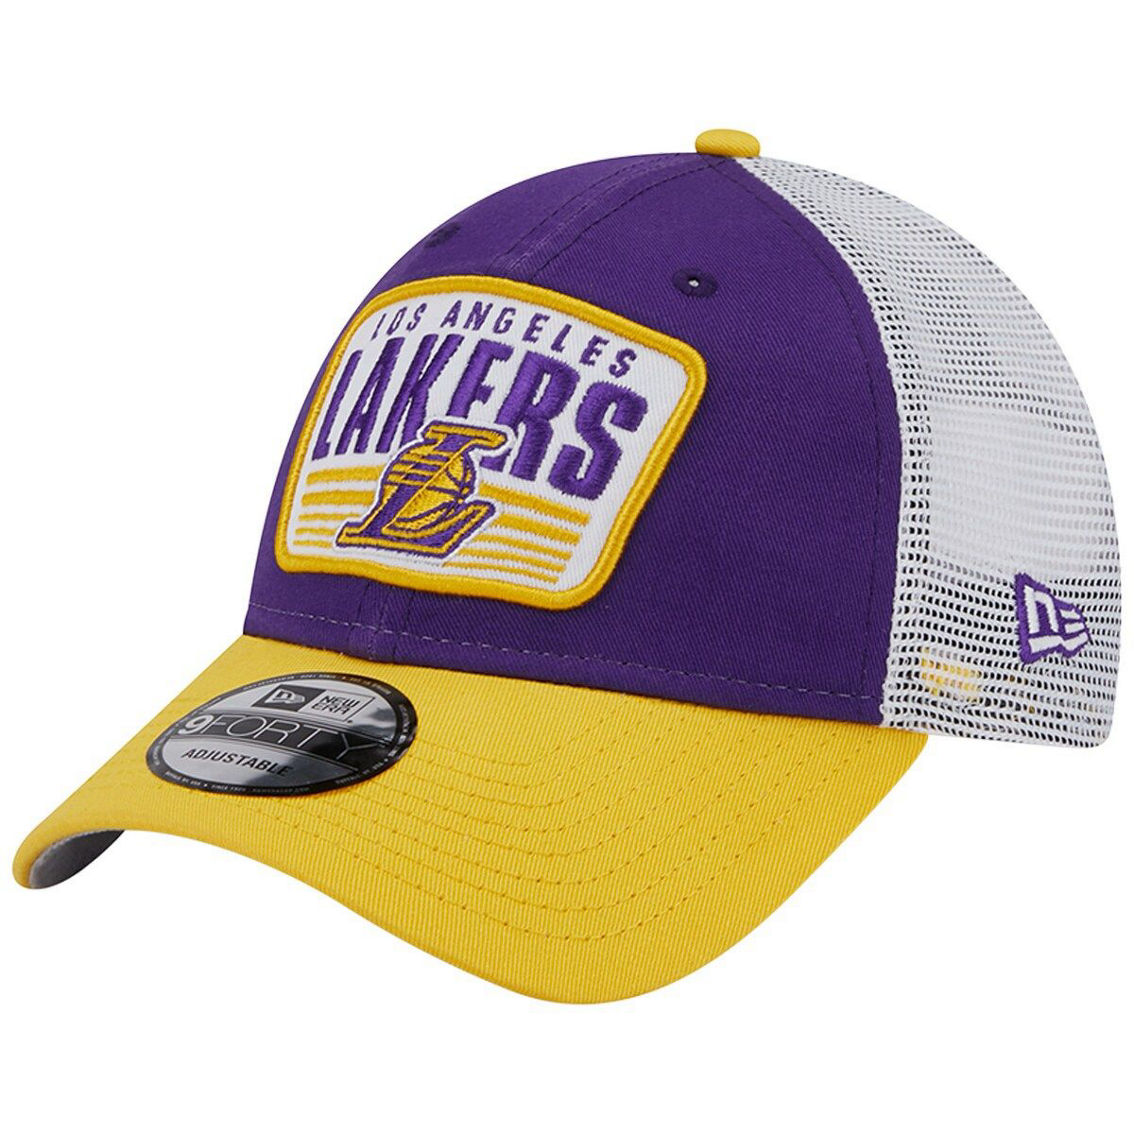 New Era Men's Purple/Gold Los Angeles Lakers Two-Tone Patch 9FORTY Trucker Snapback Hat - Image 2 of 4